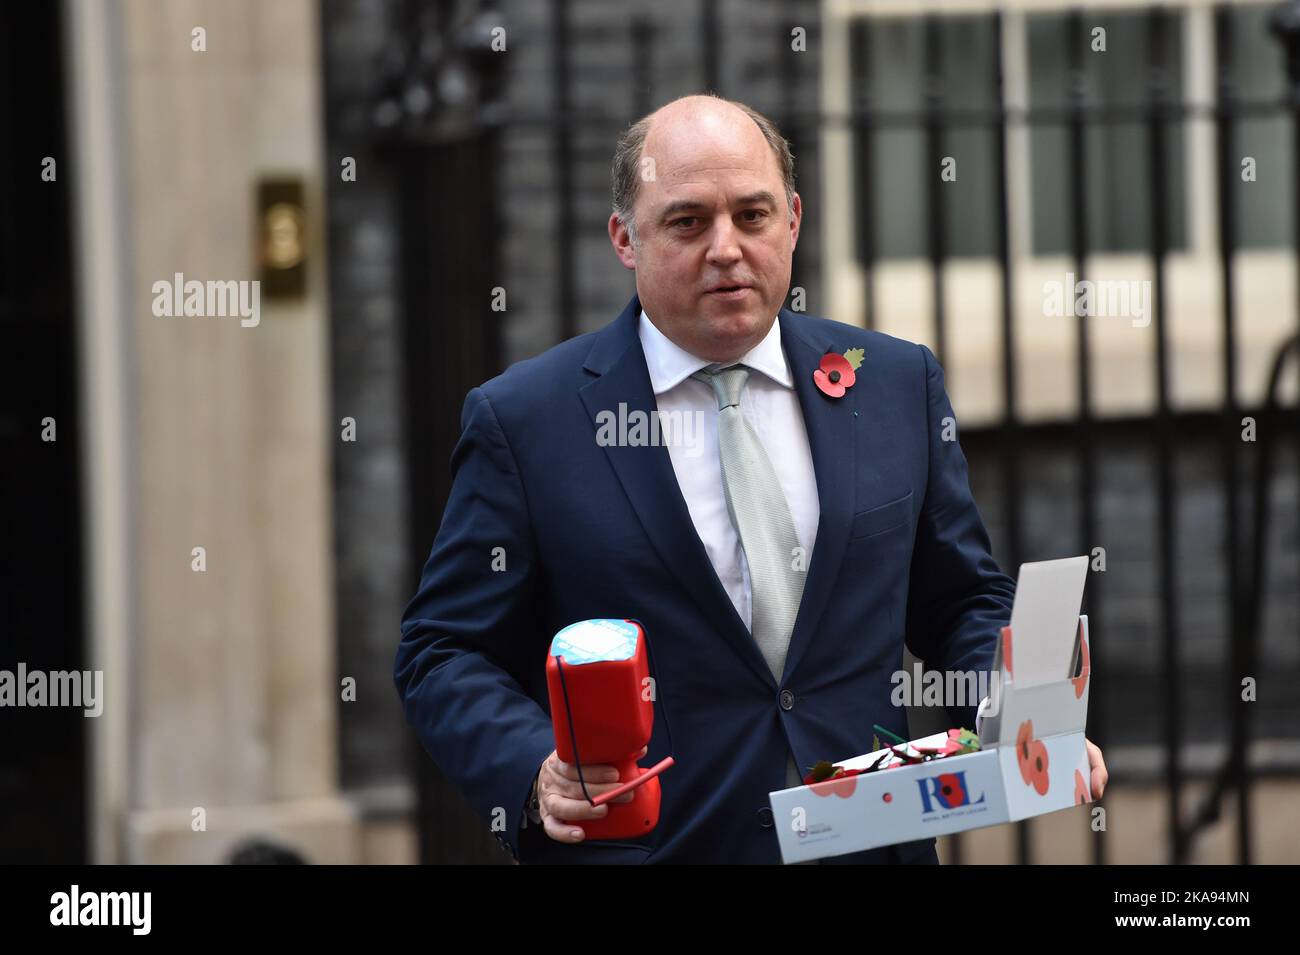 BEN WALLACE, Defense Secretary, at a cabinet meeting at 10 Downing Street, London. Secretary of State for Defense Ben Wallace offers poppies to the press as he leaves Downing Street No 10 after the weekly Cabinet Meeting. Stock Photo